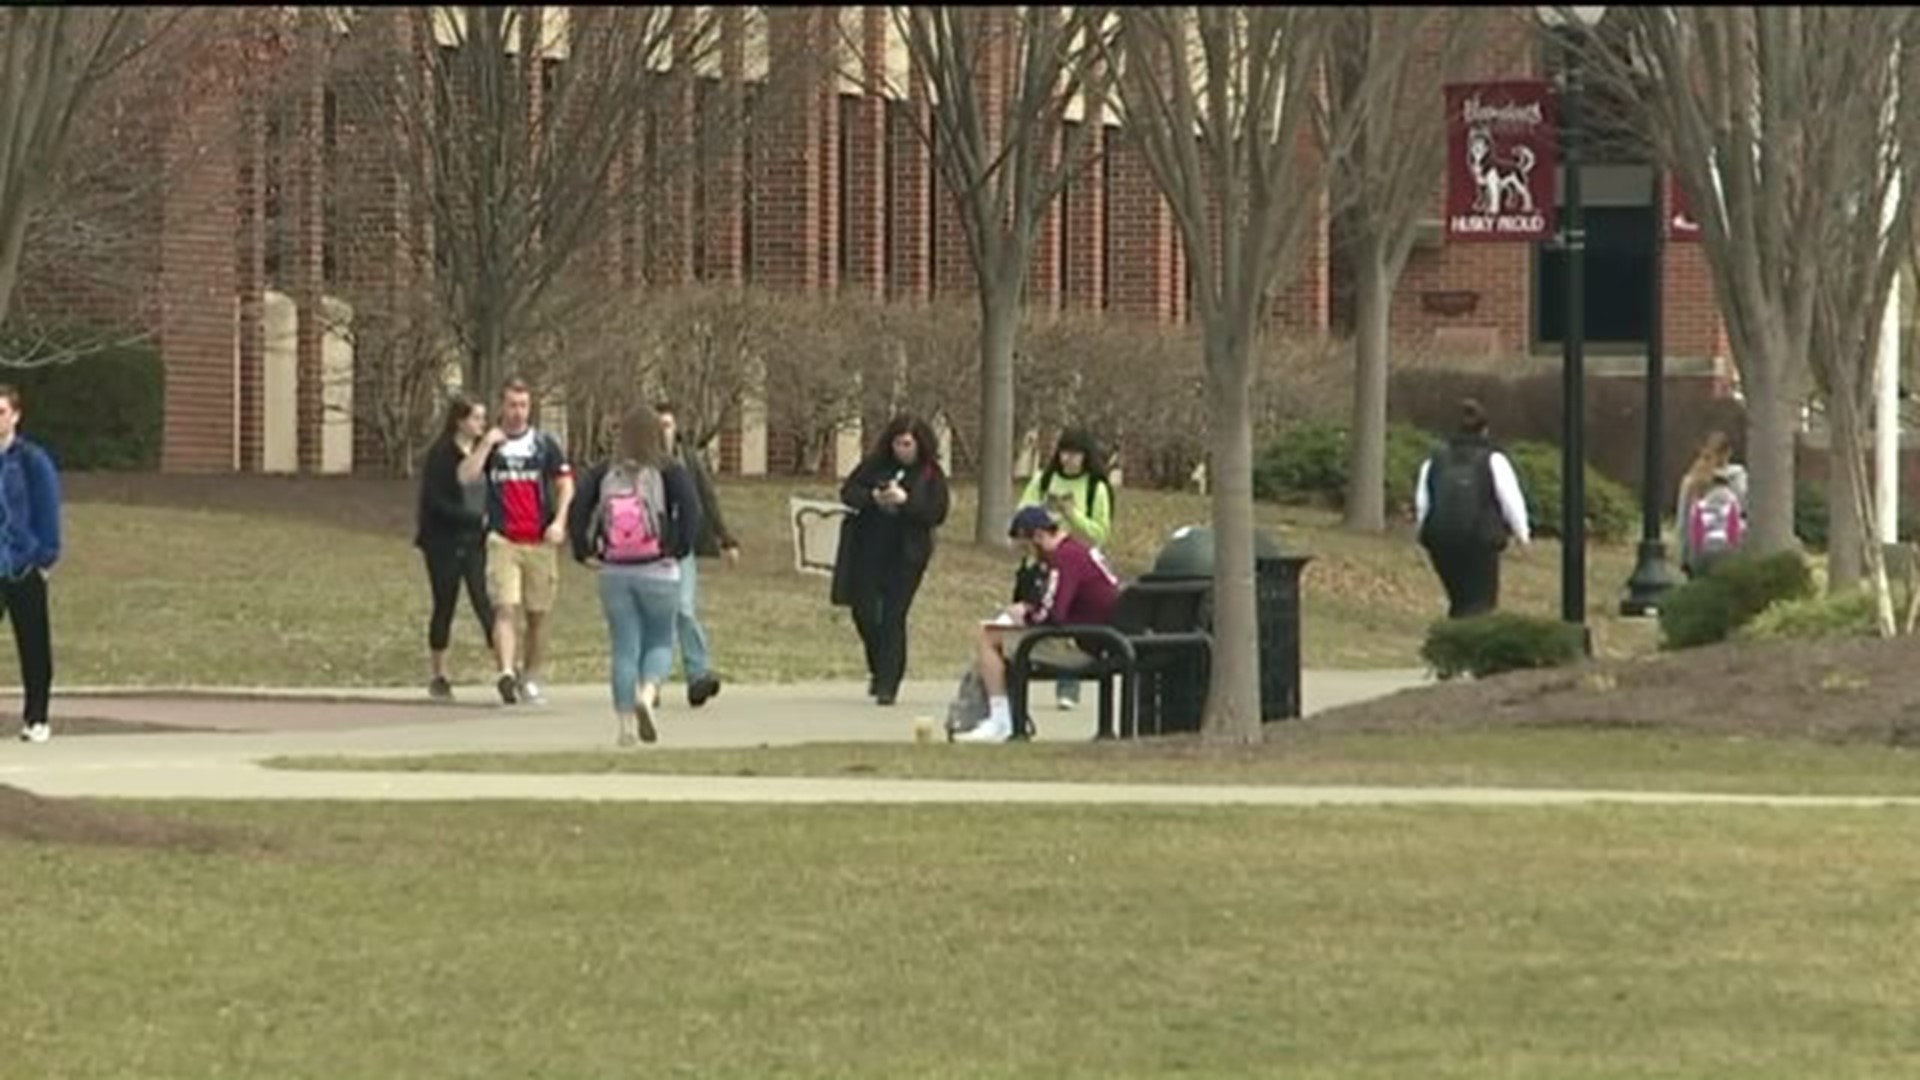 Gender-Inclusive Restrooms to Stay at Bloomsburg University